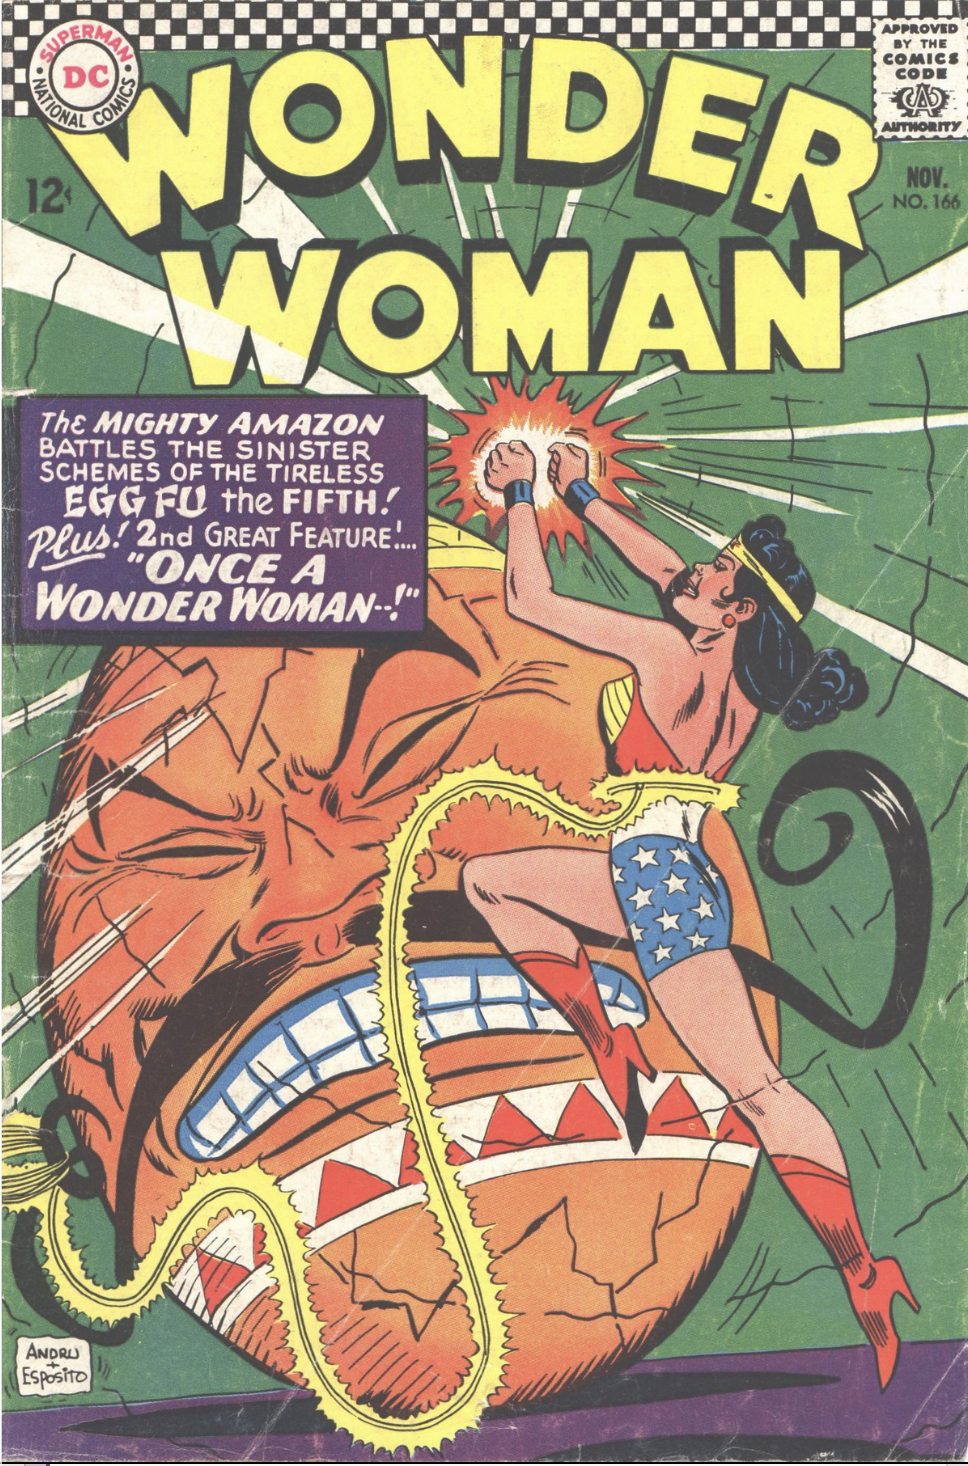 Absent Without Steve (Wonder Woman 166)